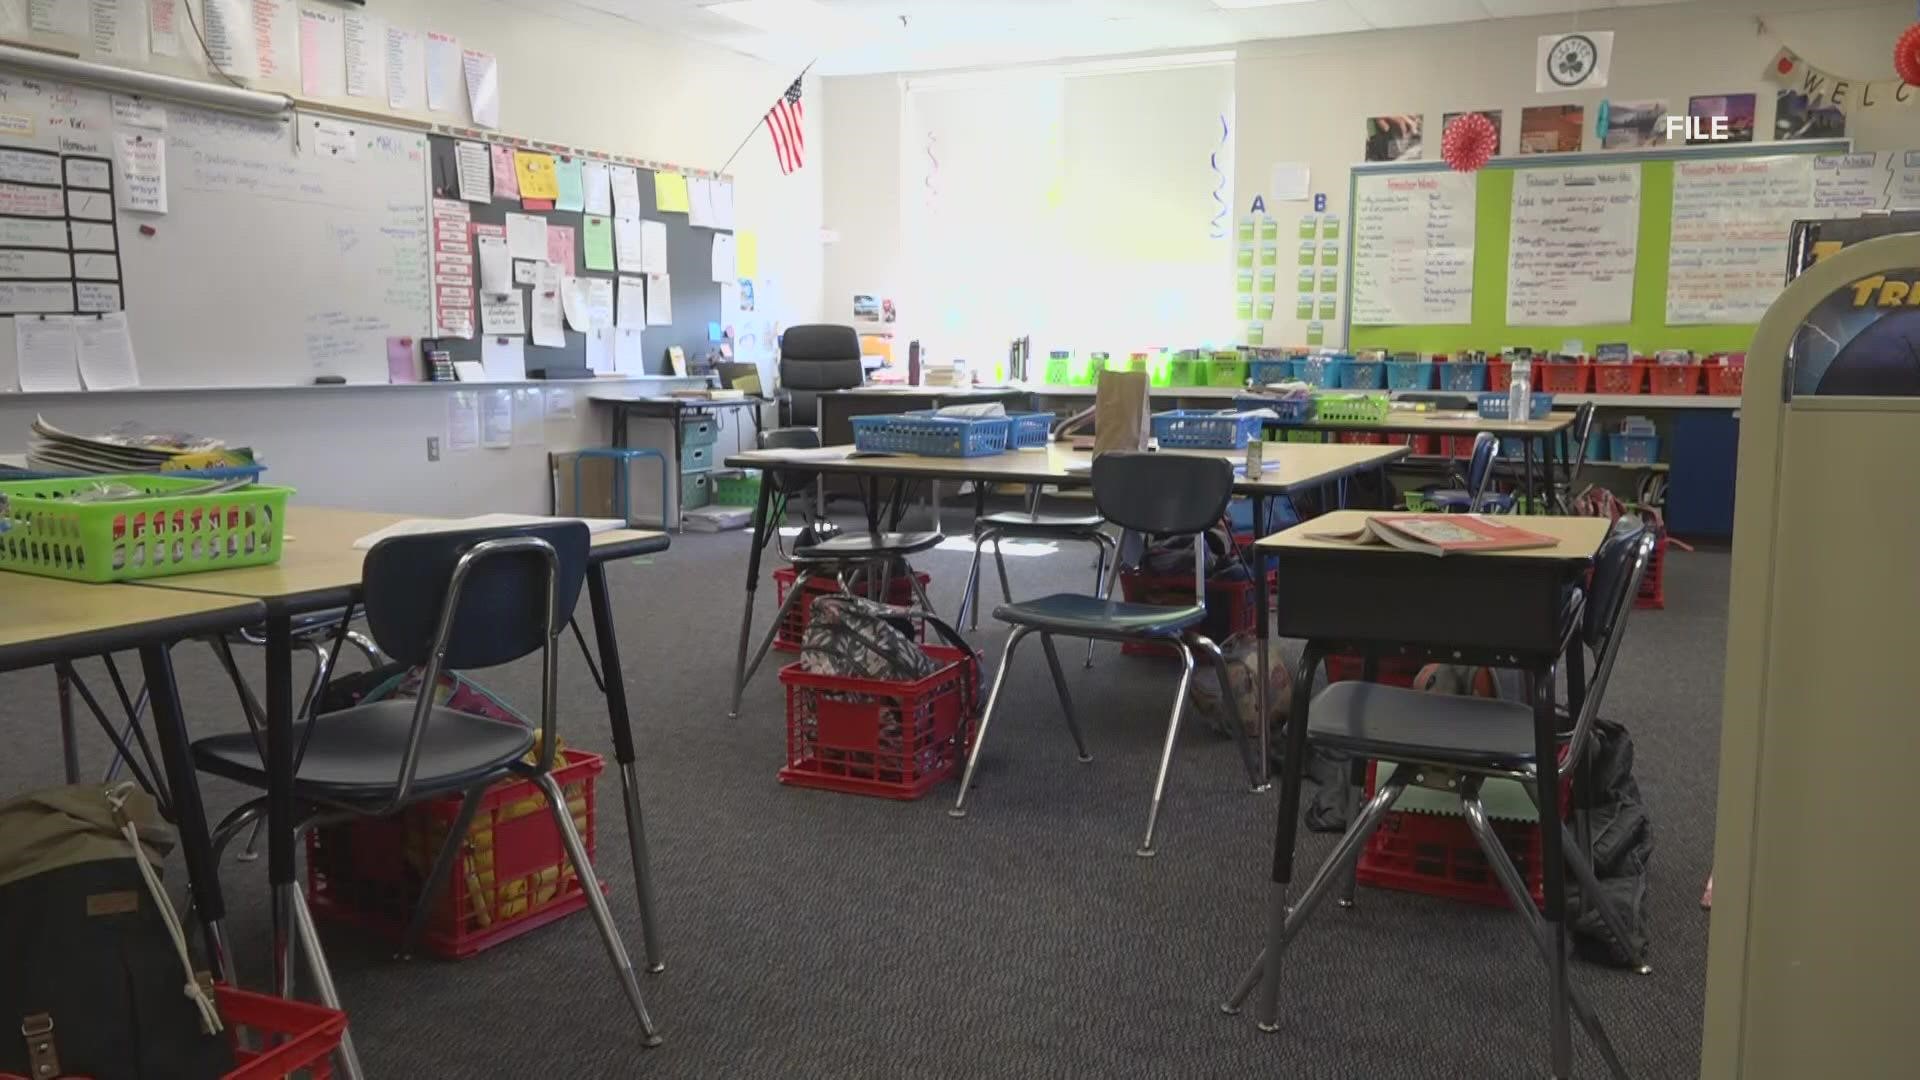 A bill making its way through the legislature would clarify a new law granting teachers 15 days of paid COVID time.